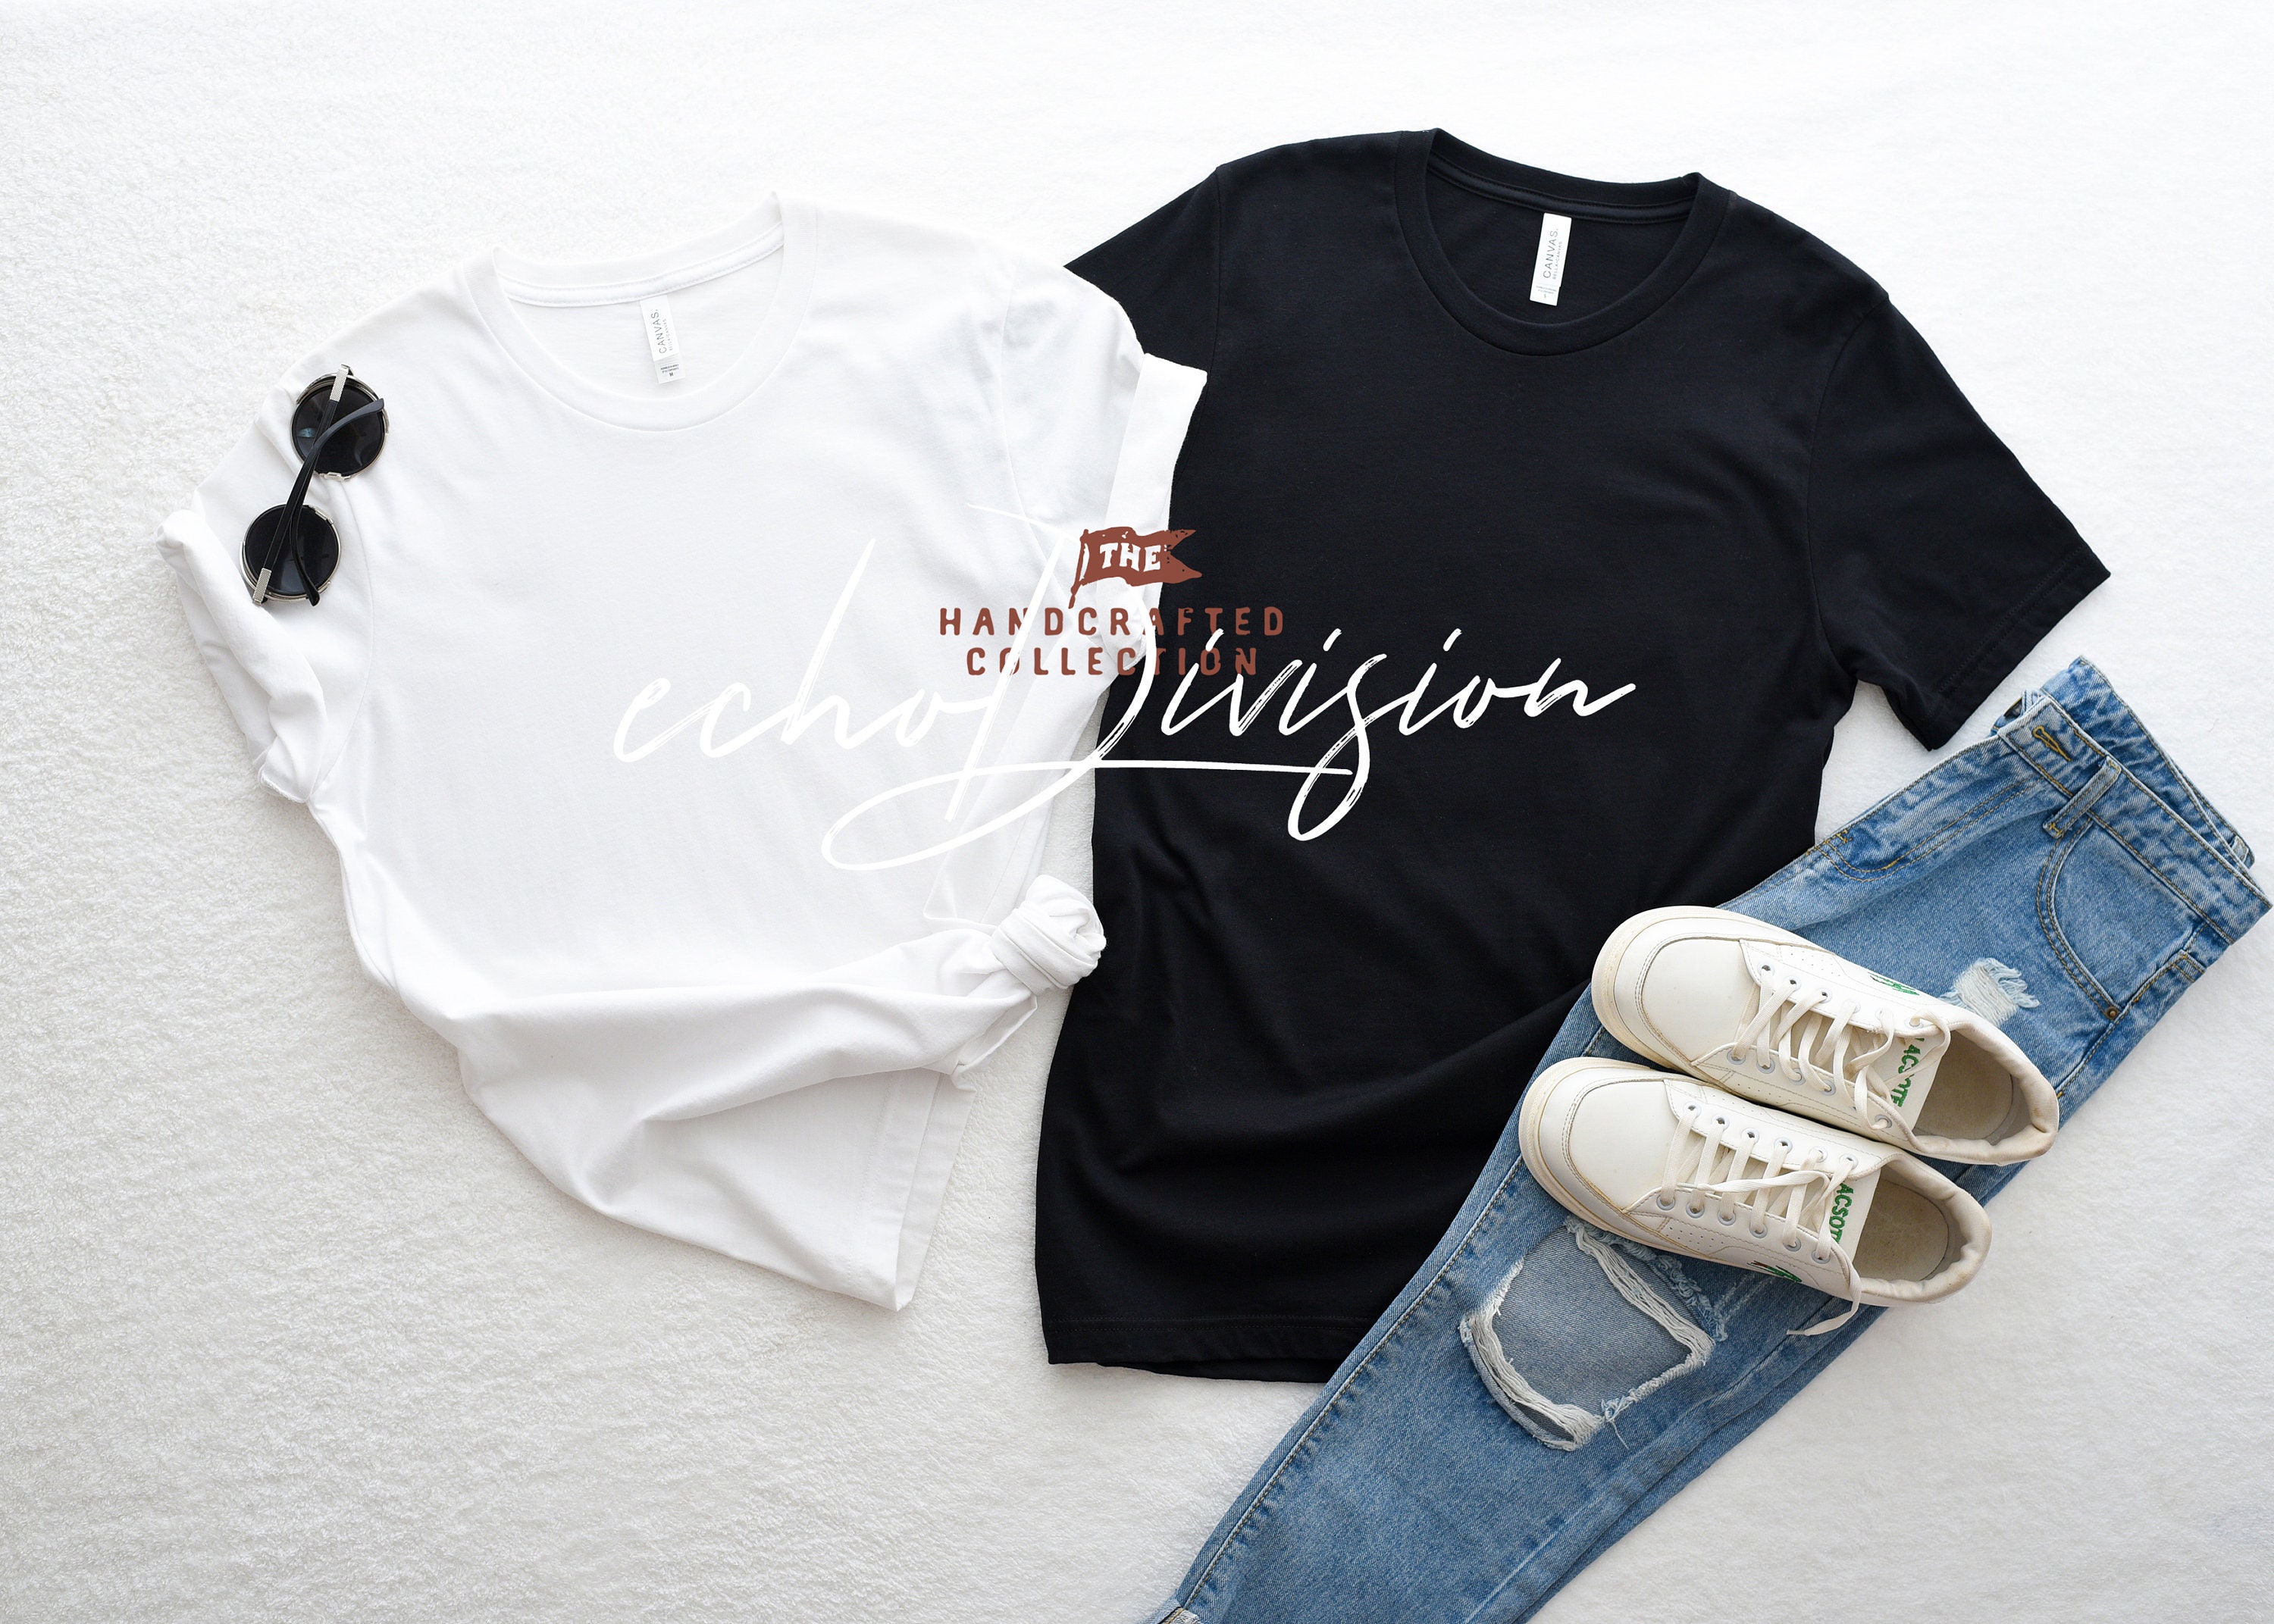 Download Couple T Shirt Mockup Free Download / Couple T Shirt ...